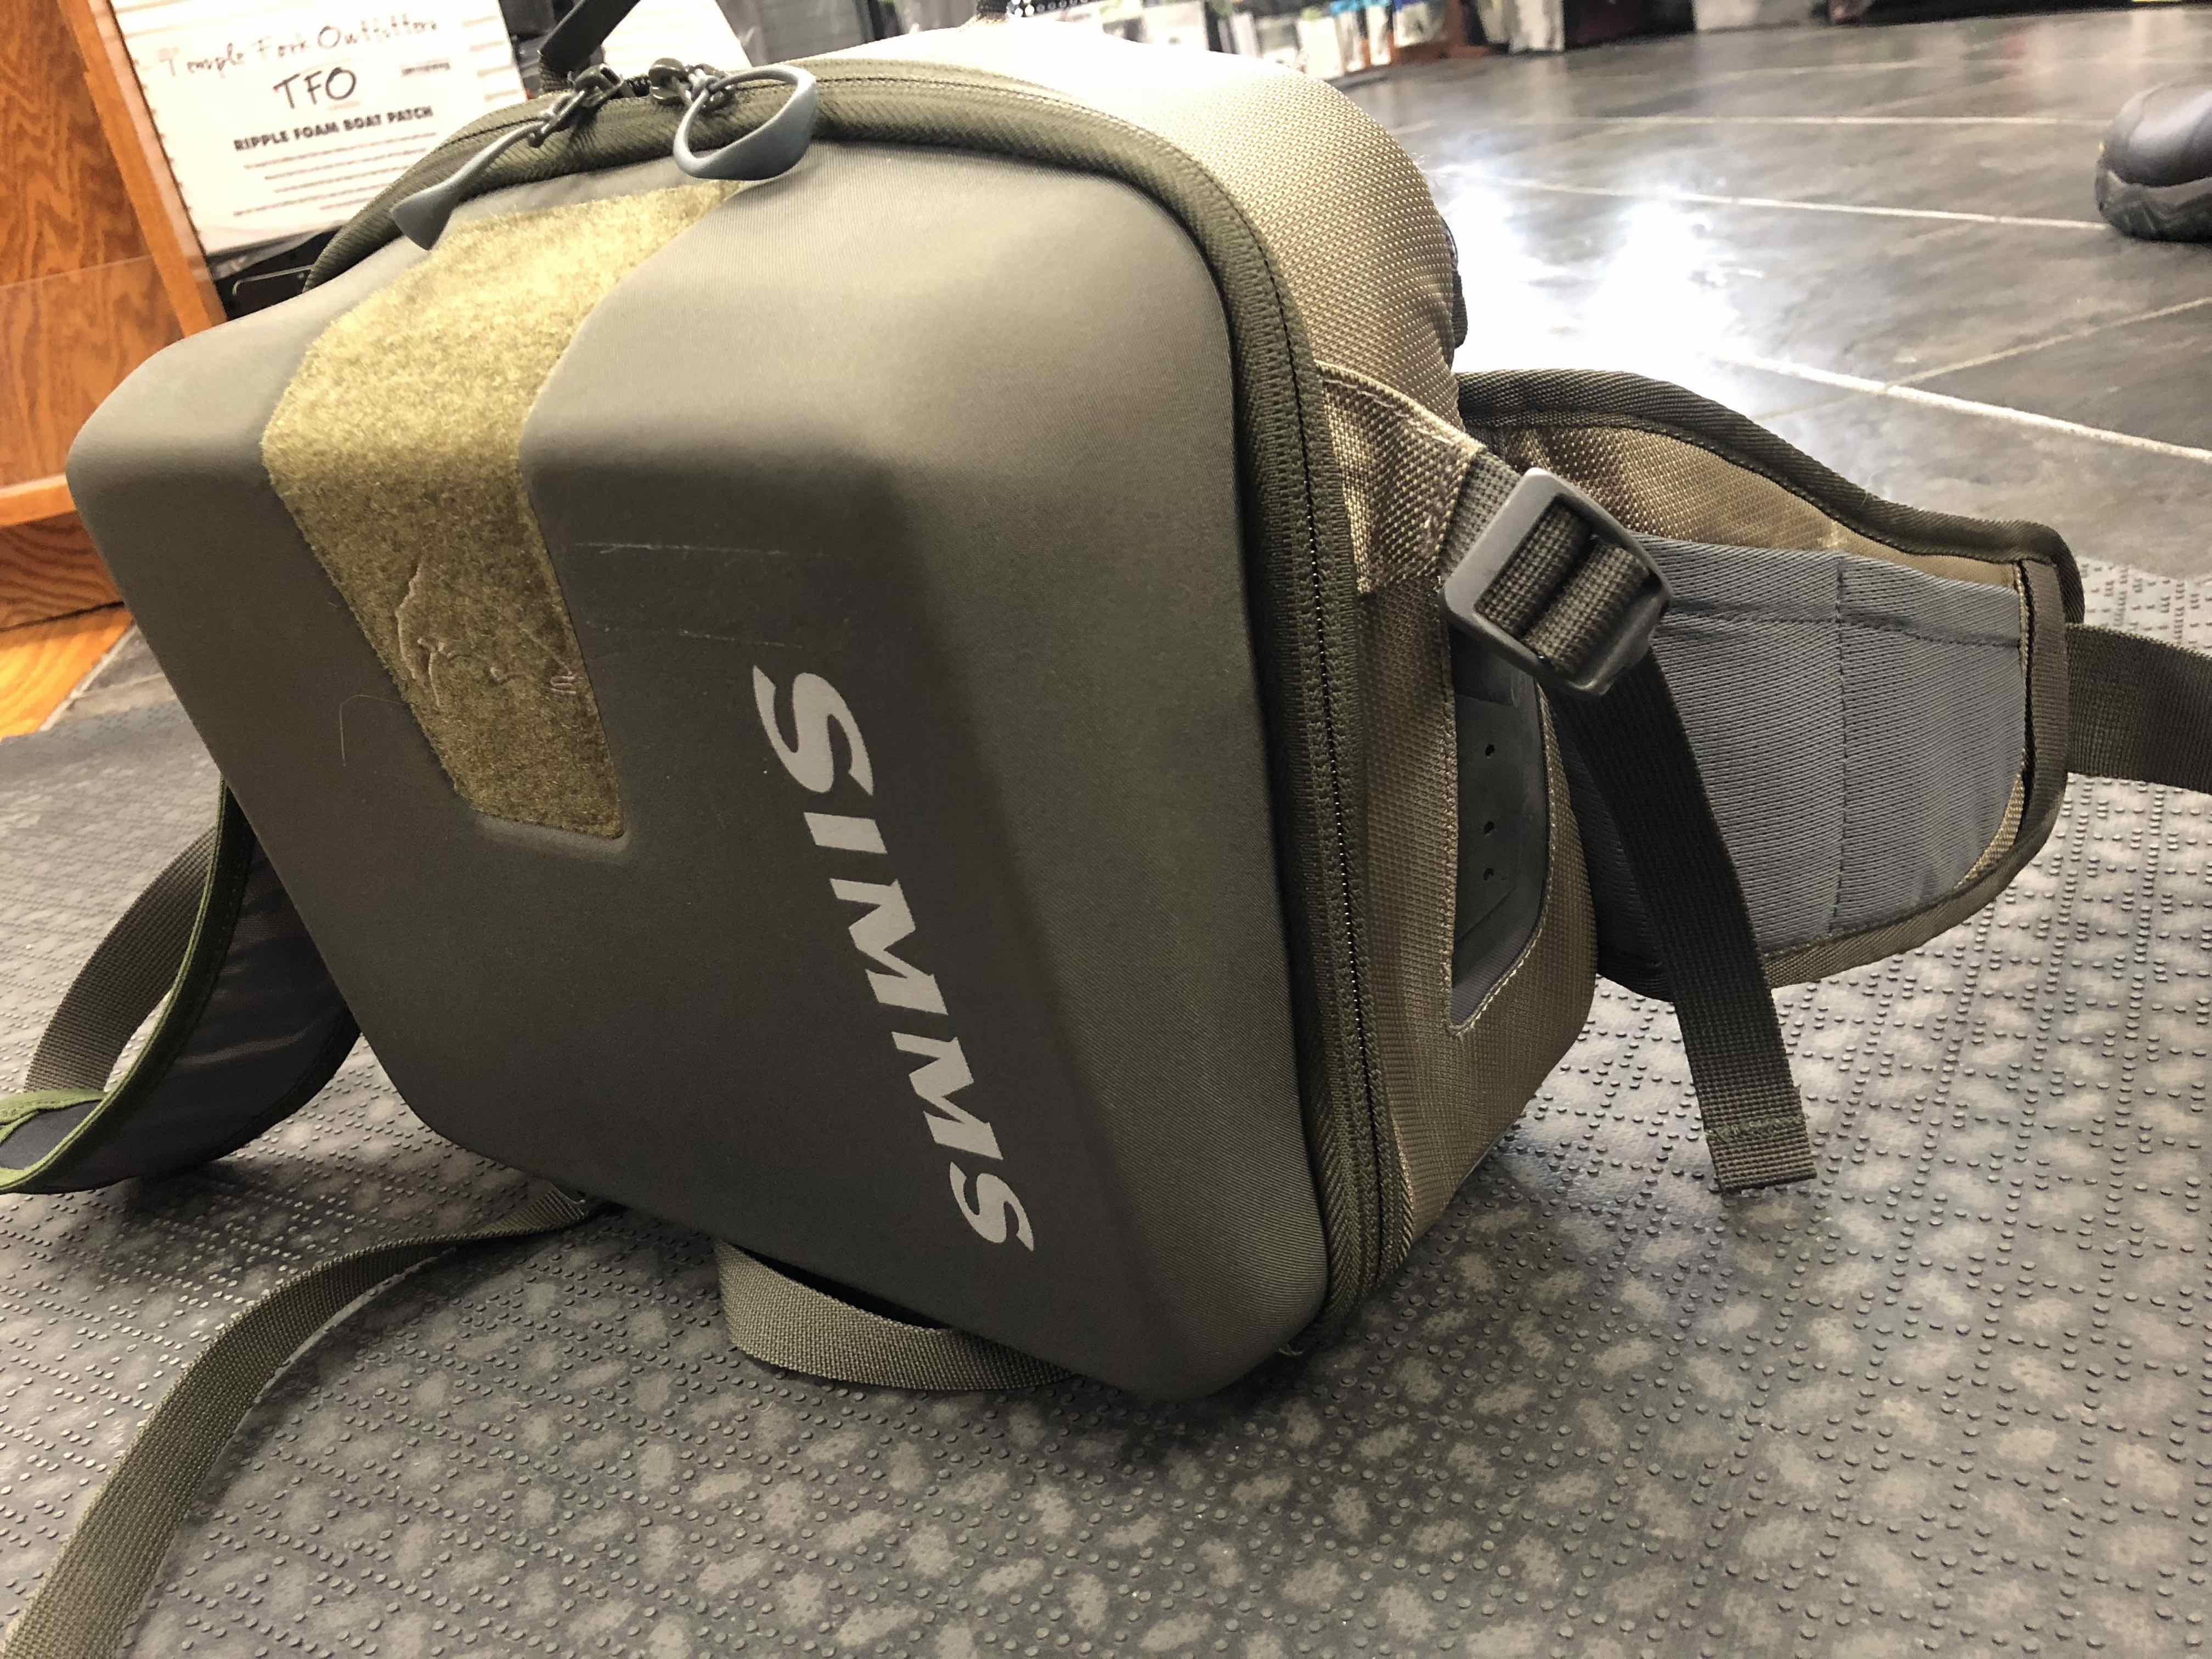 Simms Waypoints Waist Pack Large Army Green - LIKE NEW! - $80